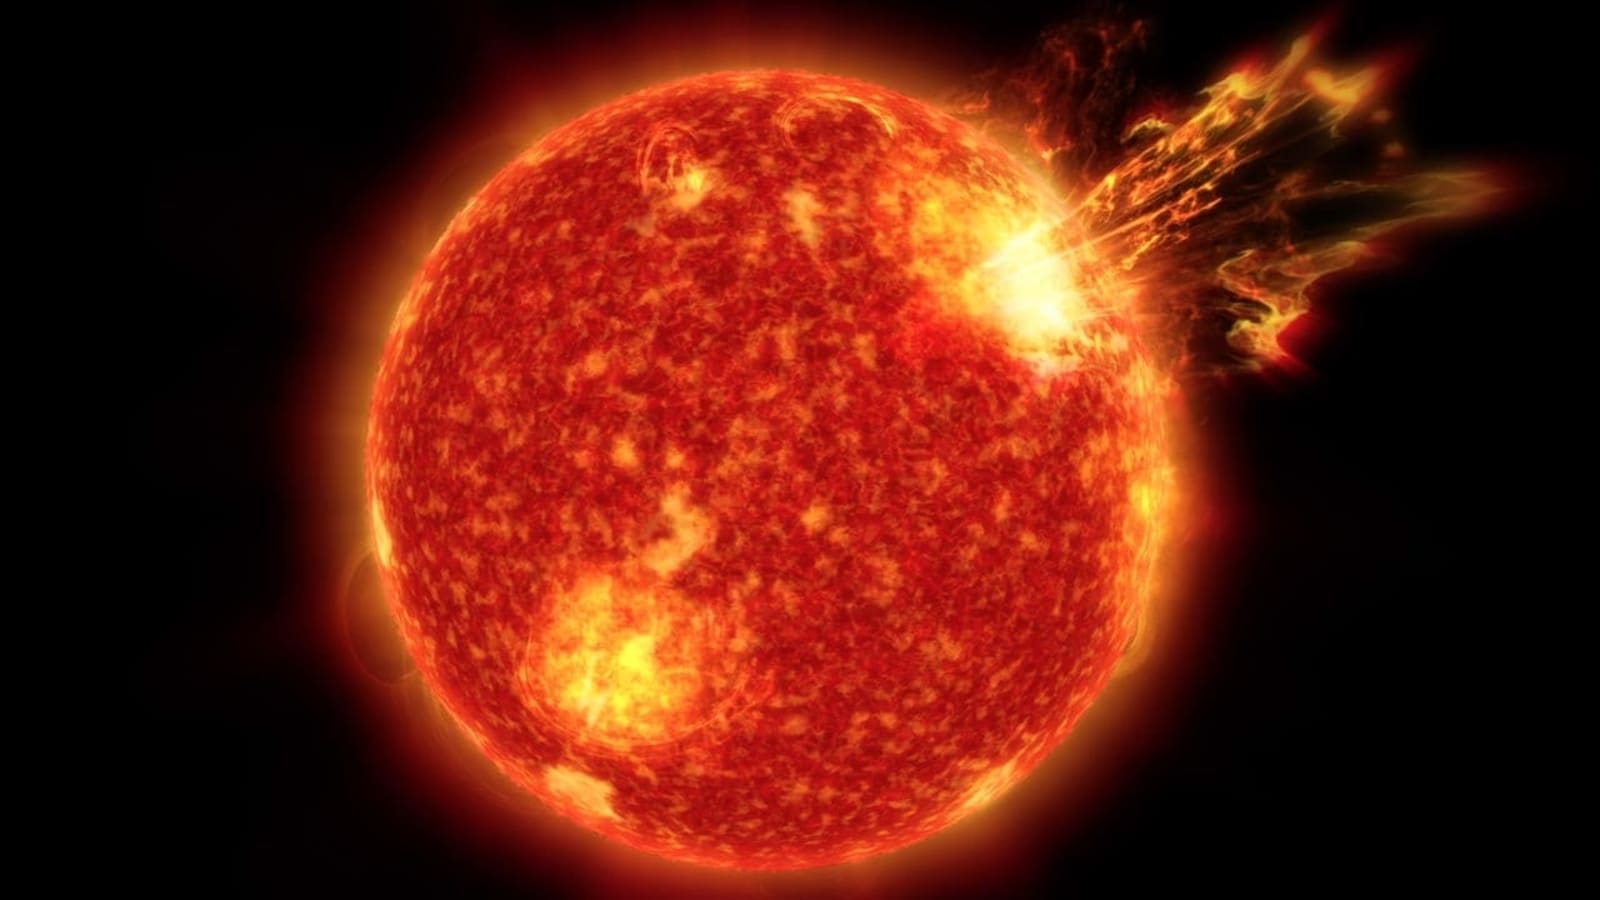 Solar storm alert! NASA says 3 sunspots could hurl out M-class solar flares